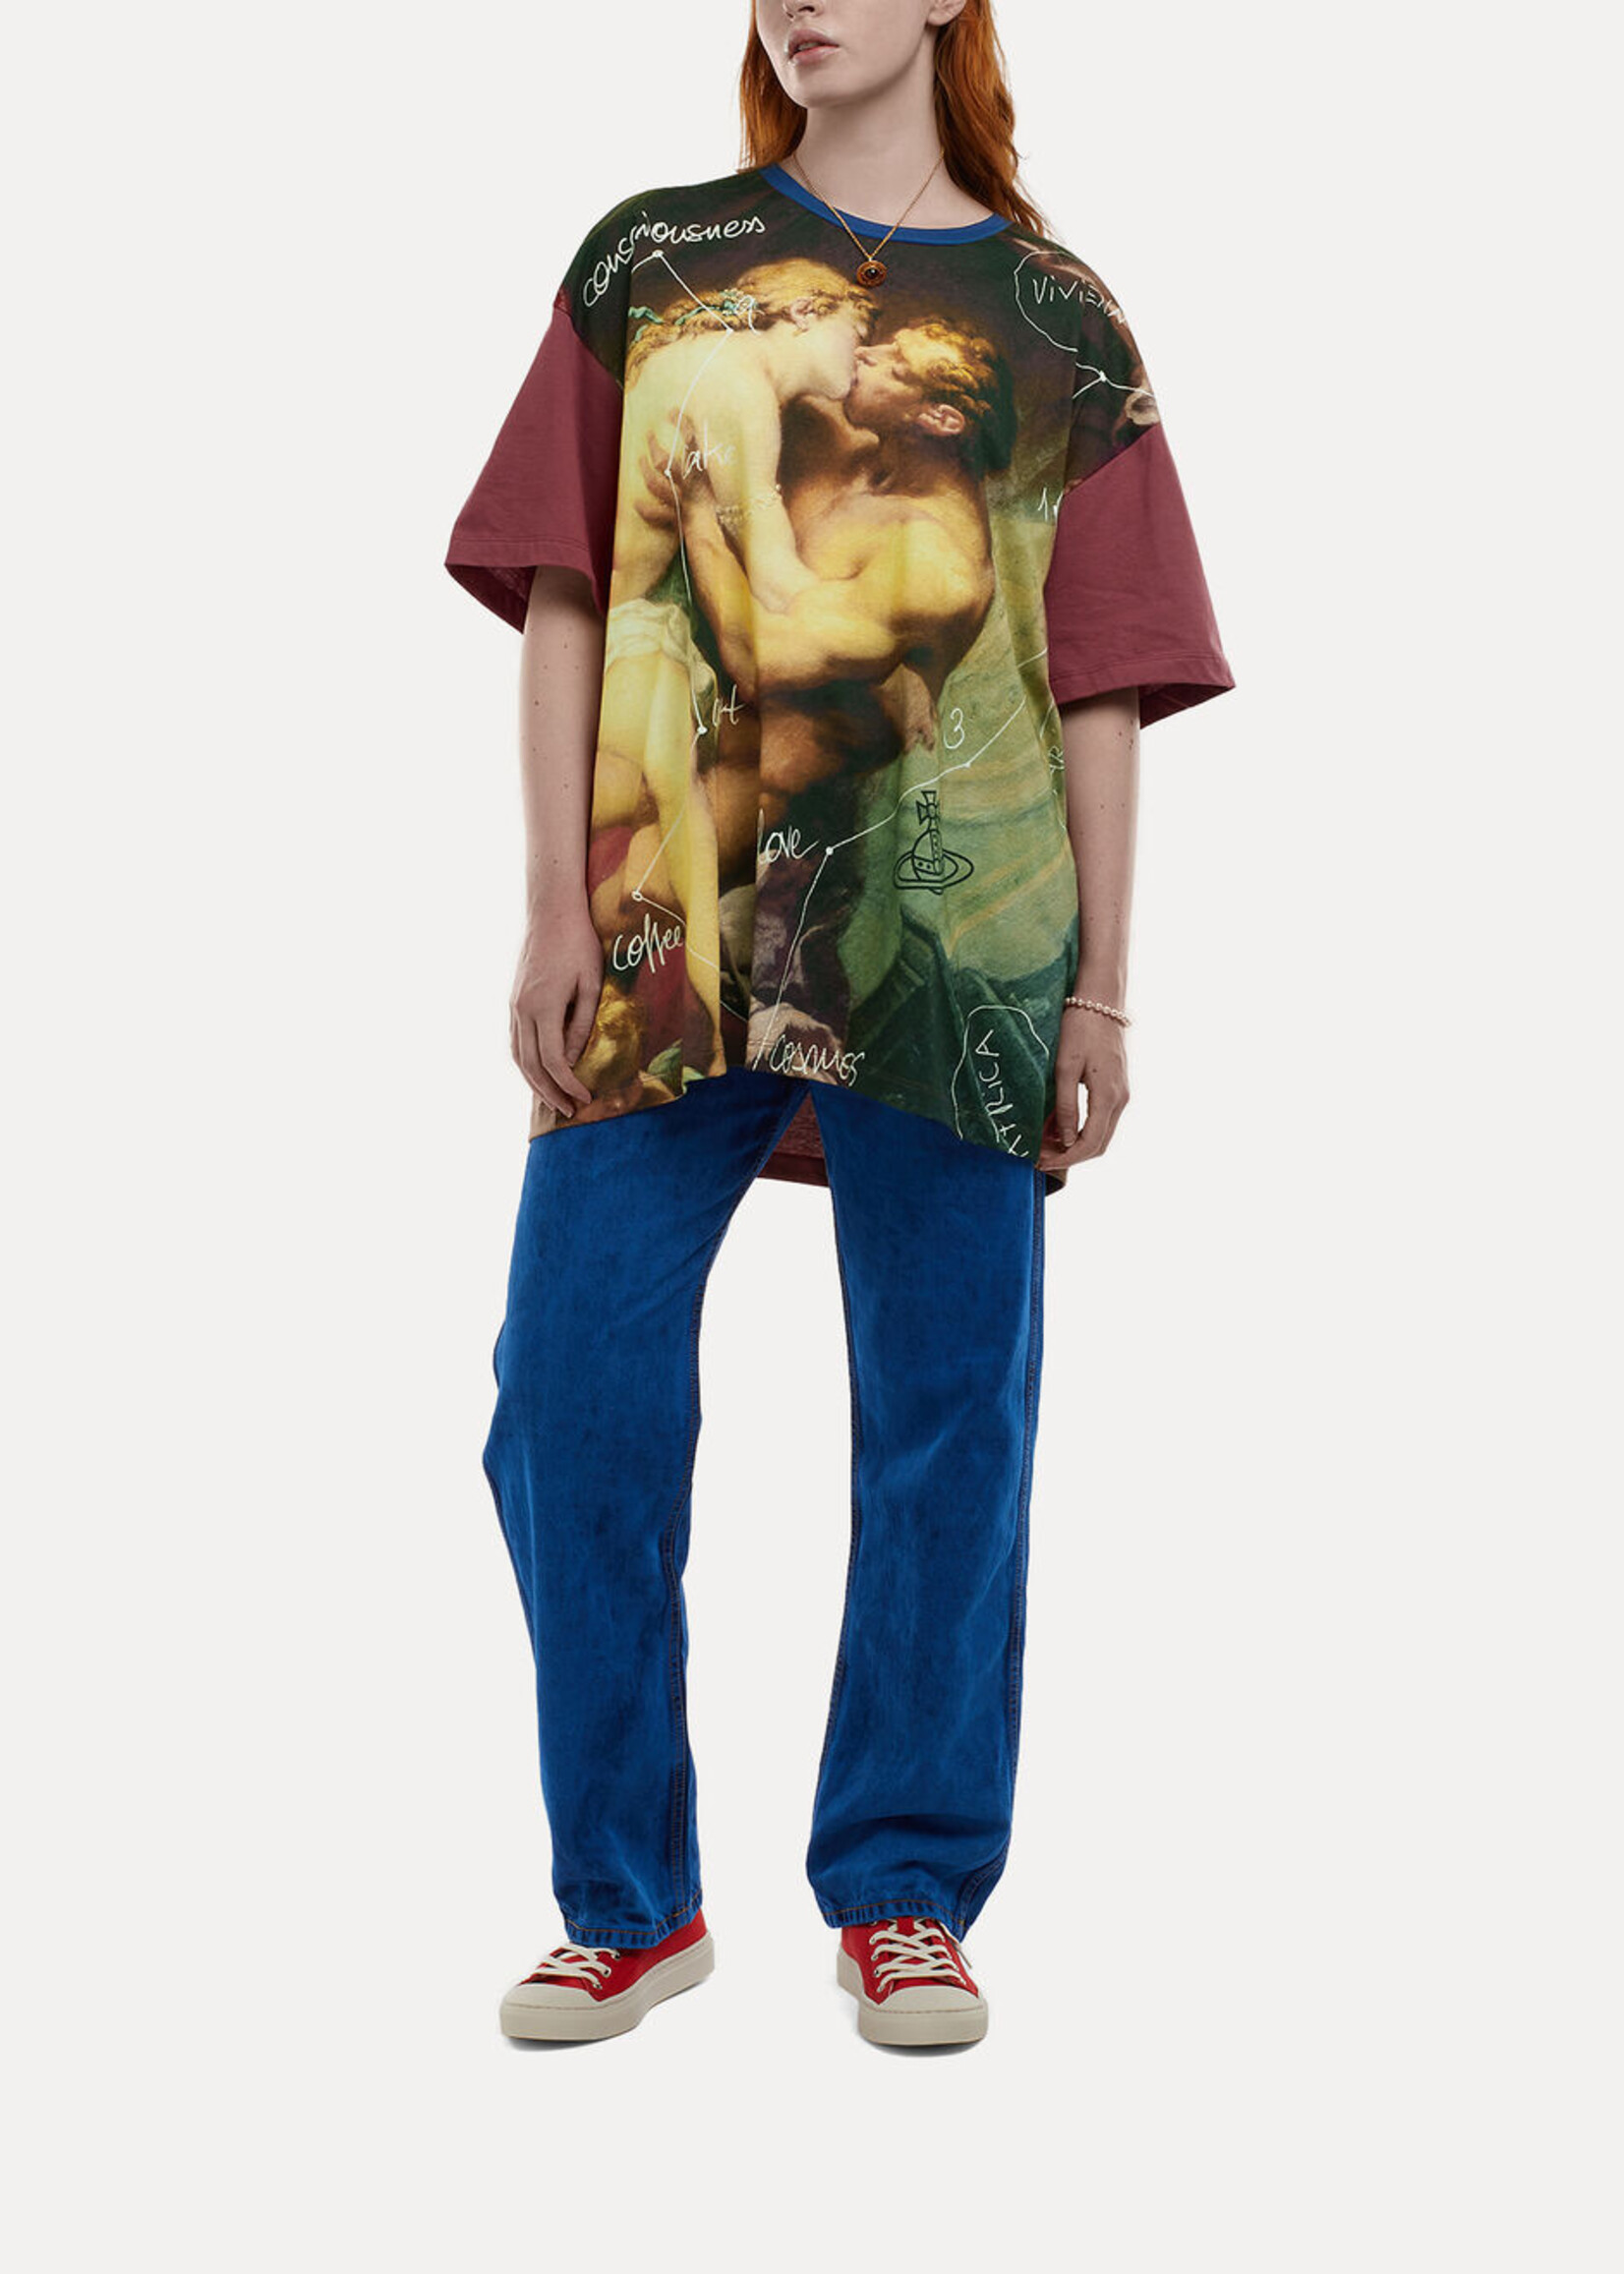 Vivienne Westwood Oversized Tee Kiss Print - NOW OR NEVER